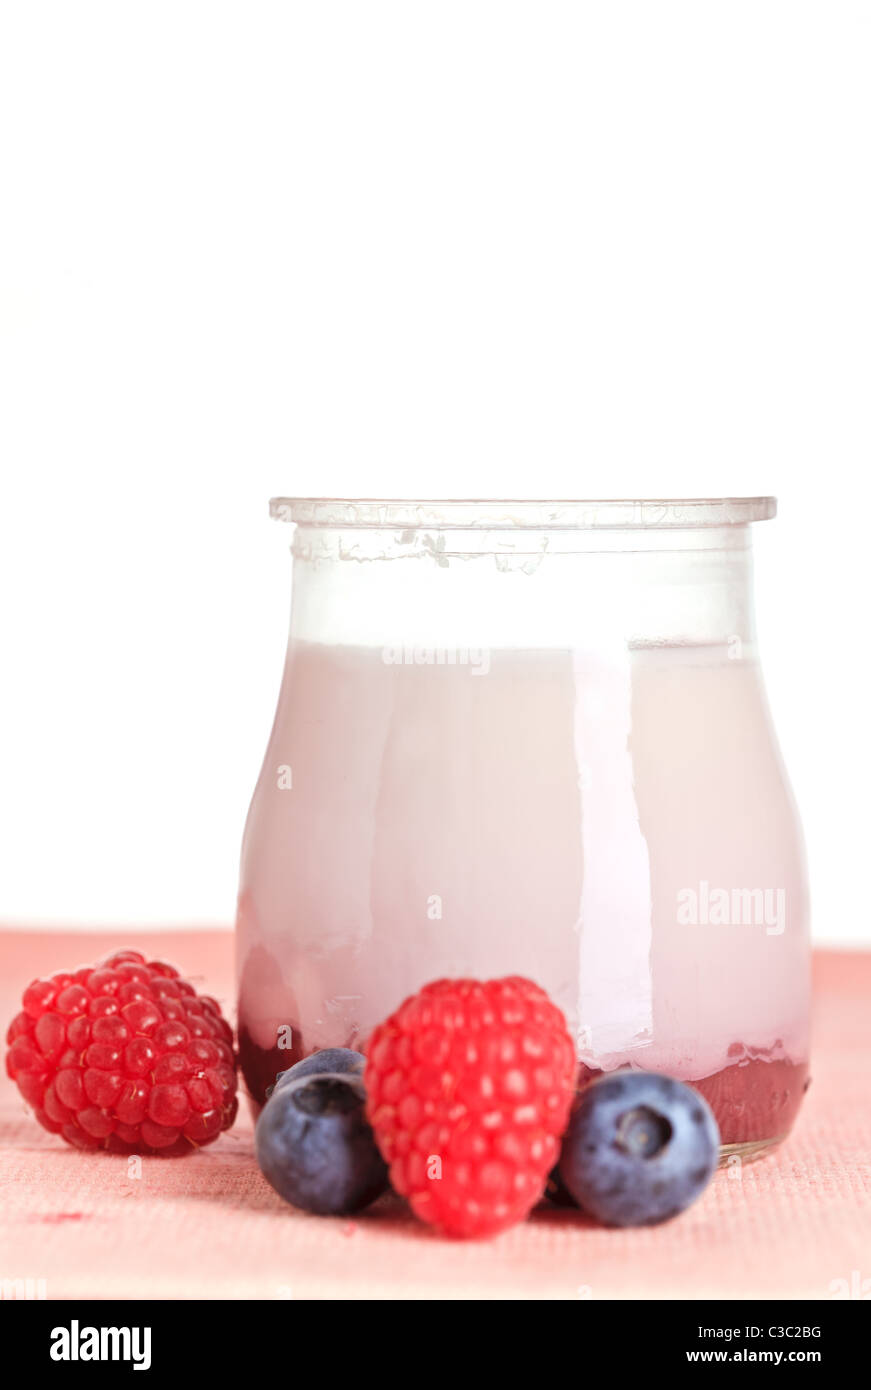 Delicious glass yogurt and fresh raspberry and blueberry. Shallow depth of field Stock Photo